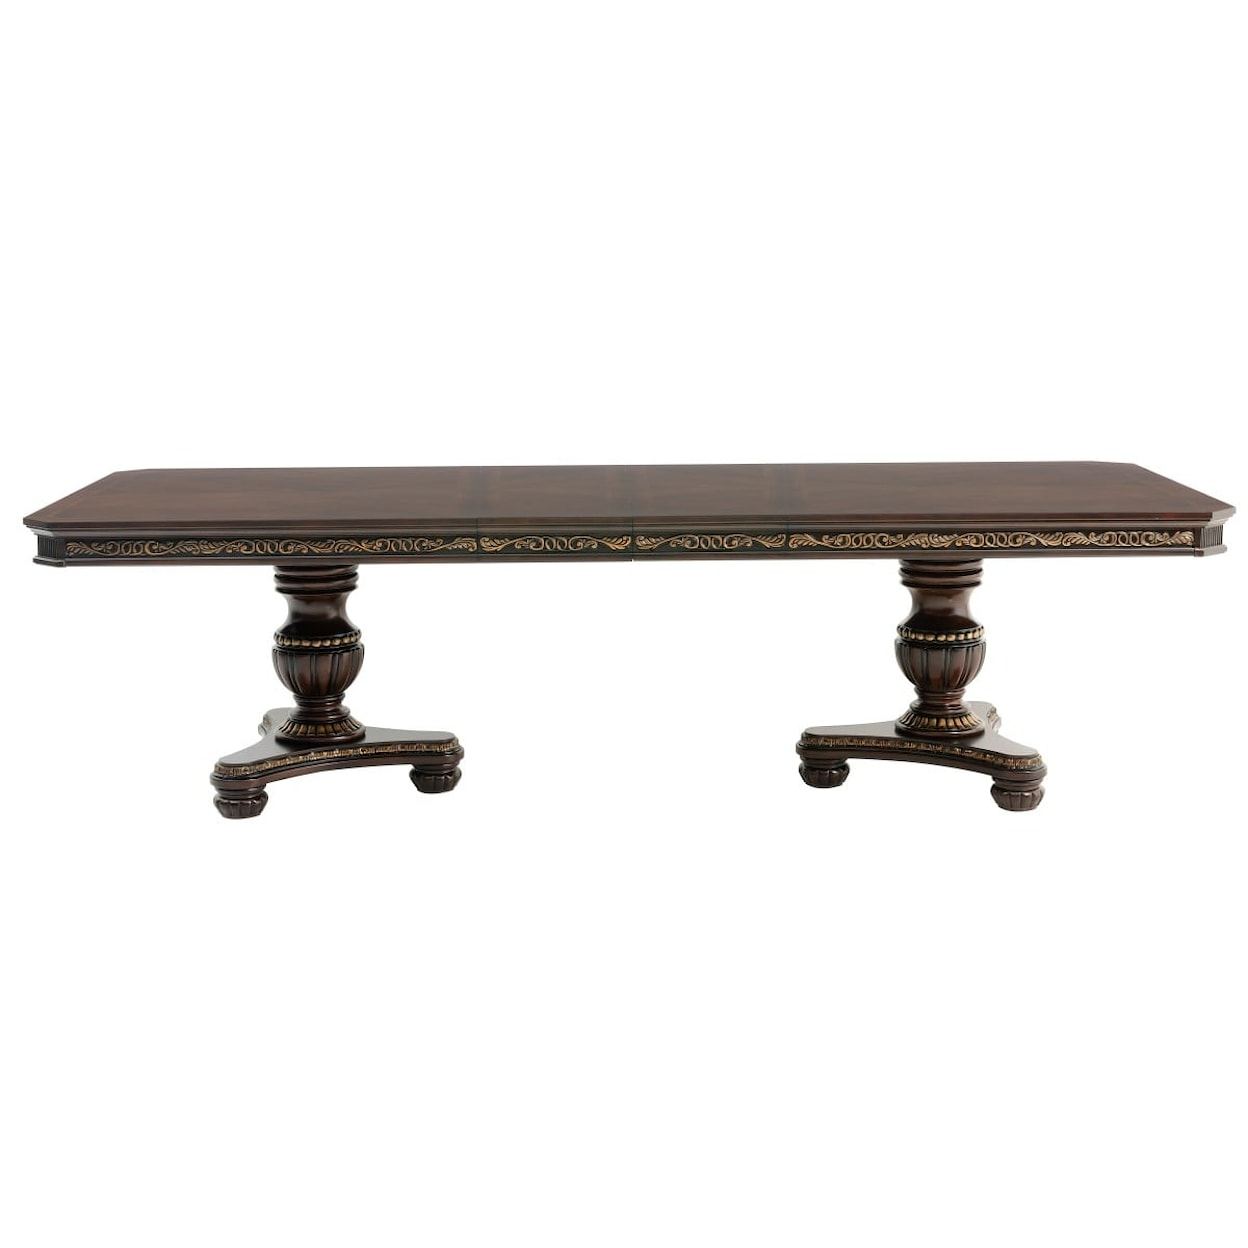 Homelegance Russian Hill Dining Table